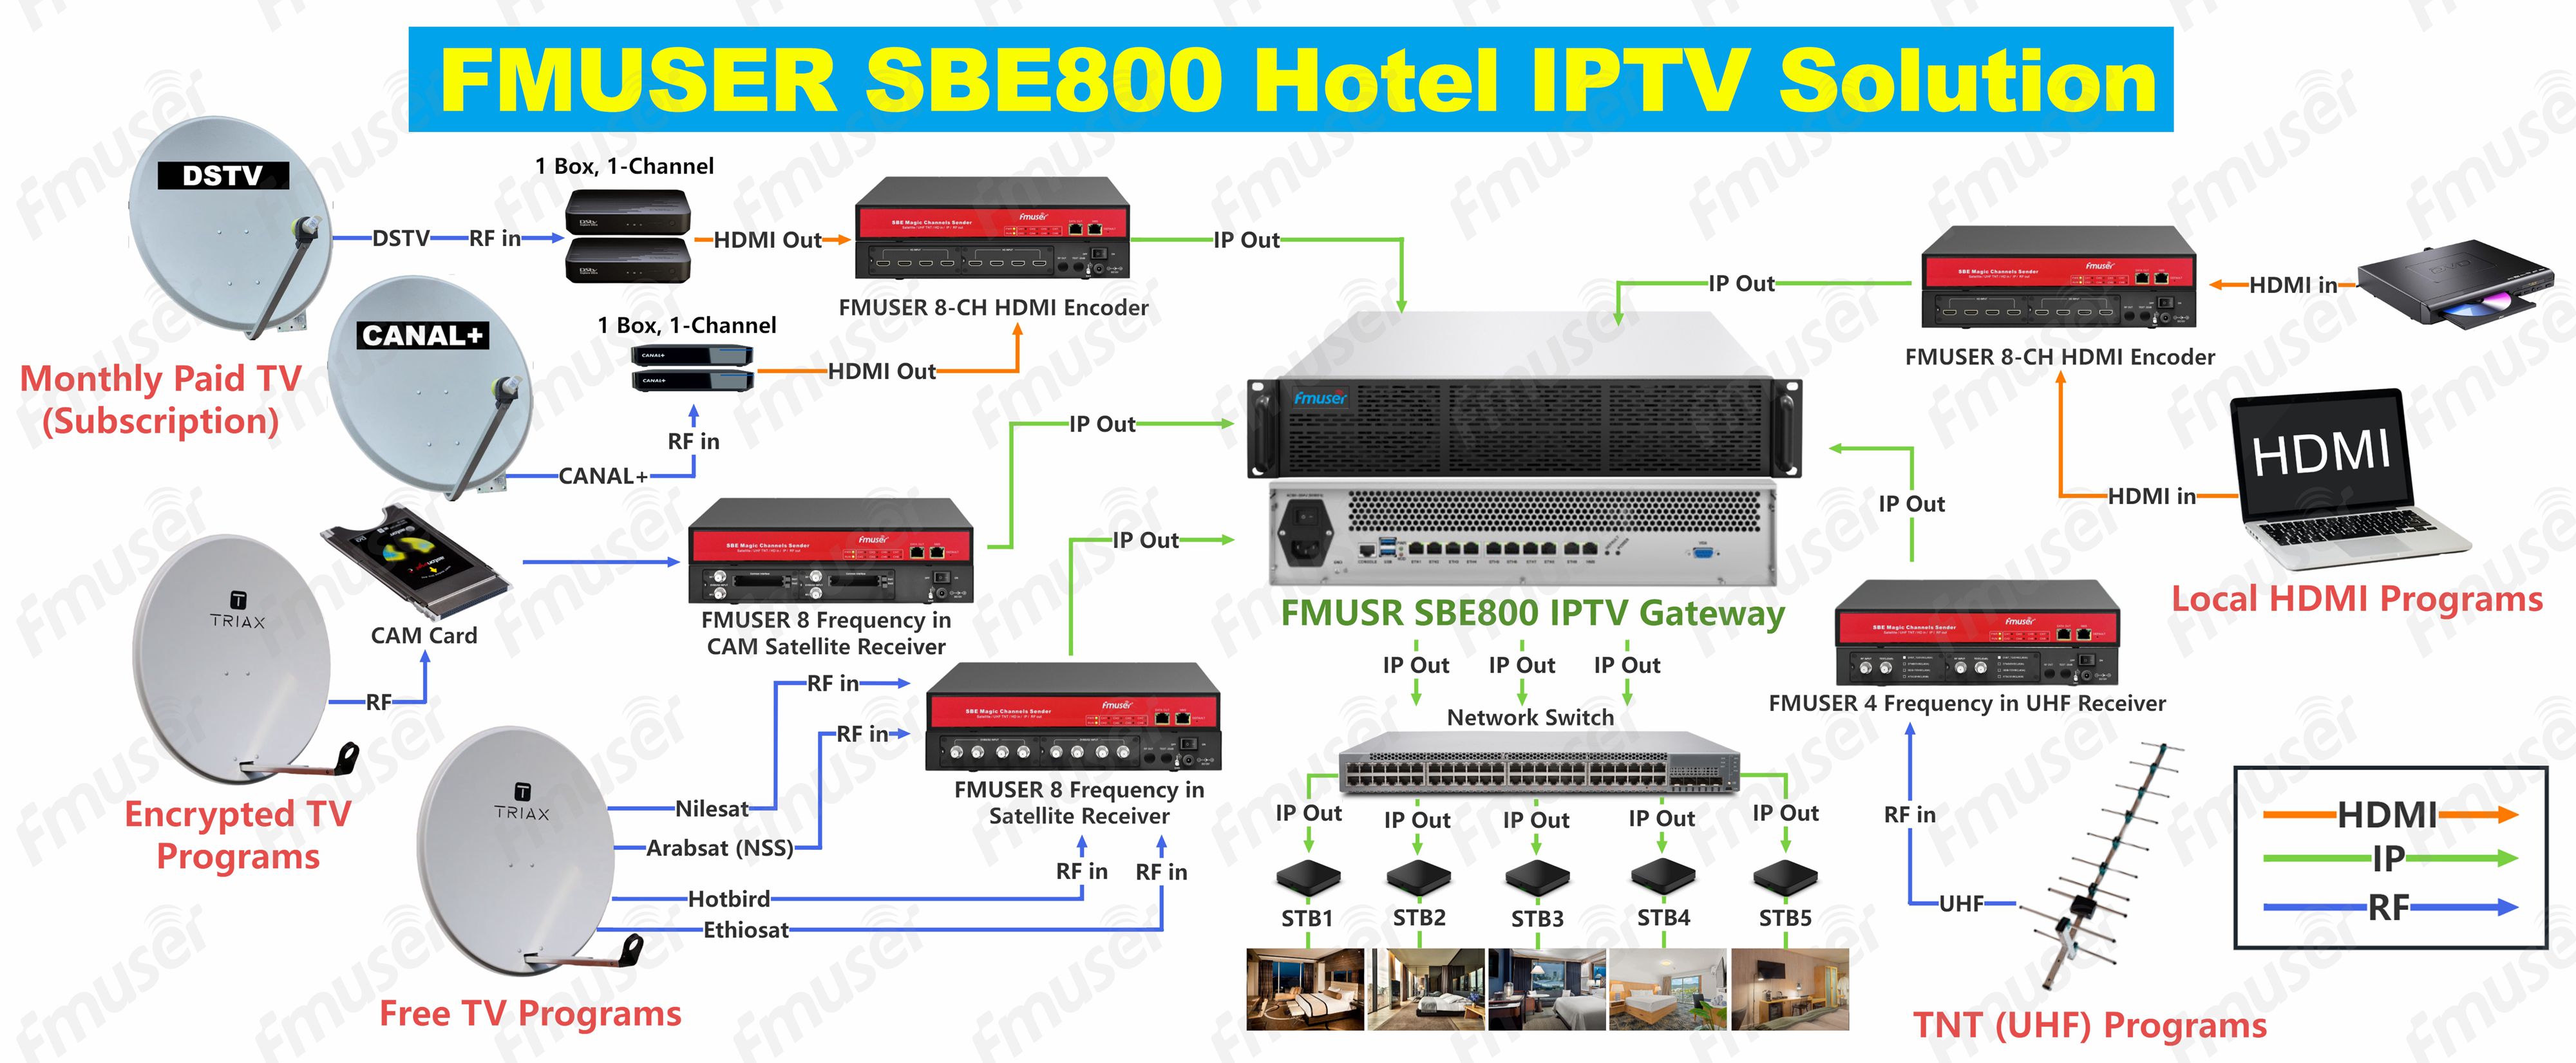 Hotel IPTV systems, operating on IP networks instead of cable infrastructure, offer advantages over traditional cable TV systems. They have lower equipment costs, simplified maintenance with remote troubleshooting, and easier installation using existing IP networks. This makes hotel IPTV a cost-effective, low-maintenance, and seamless solution for enhancing in-room entertainment experiences.